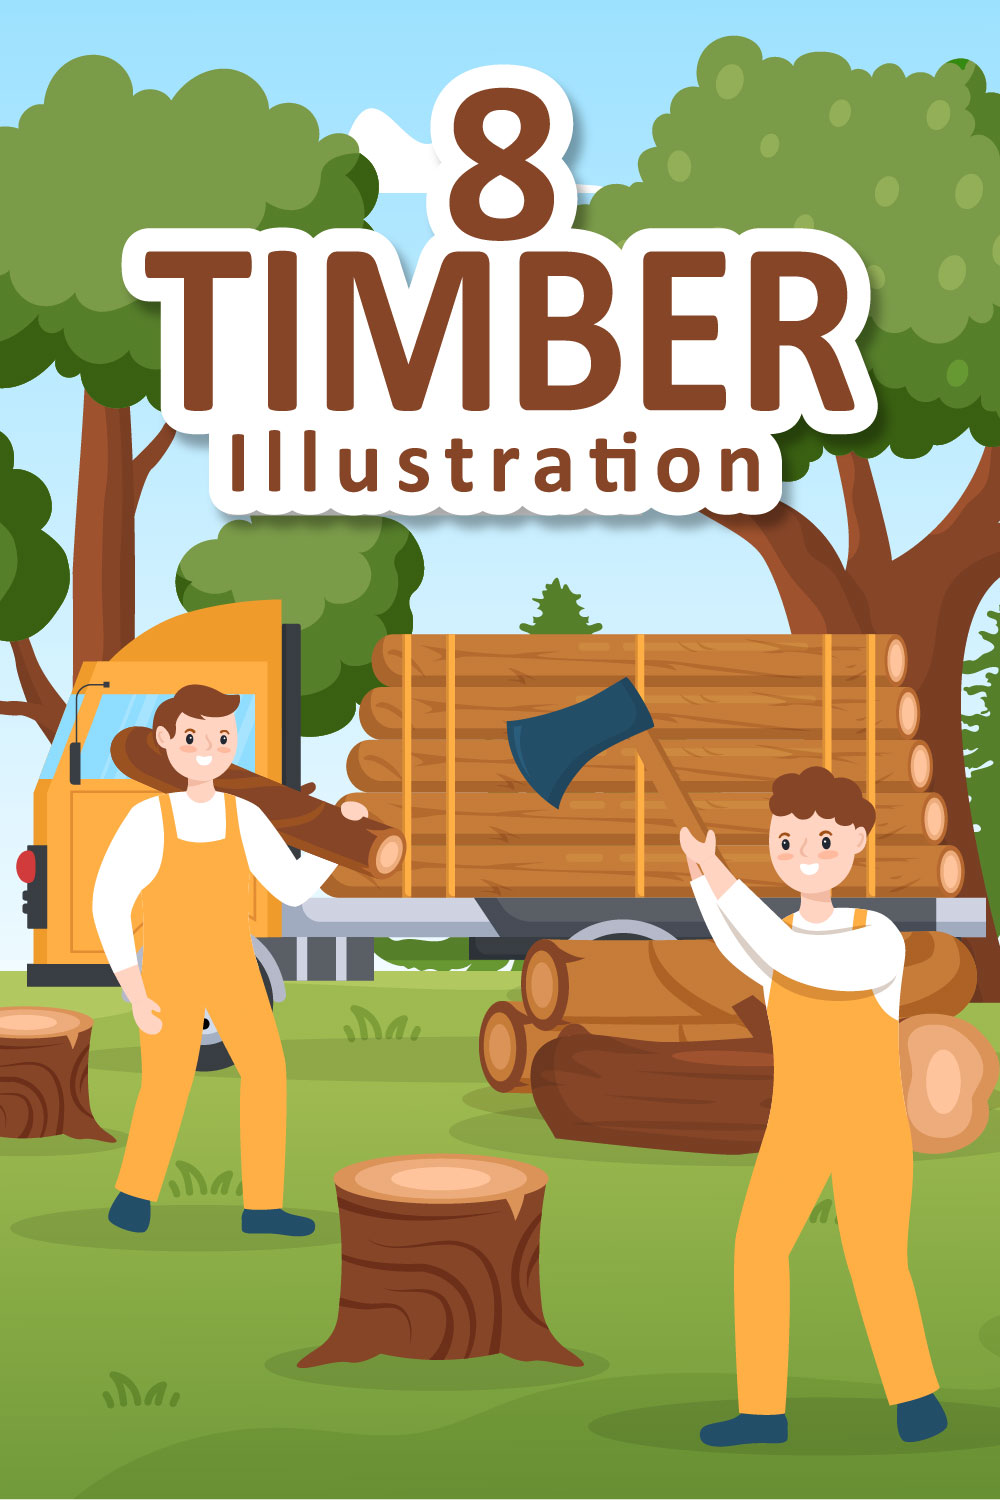 Tree Cutting and Timber Illustration pinterest image.